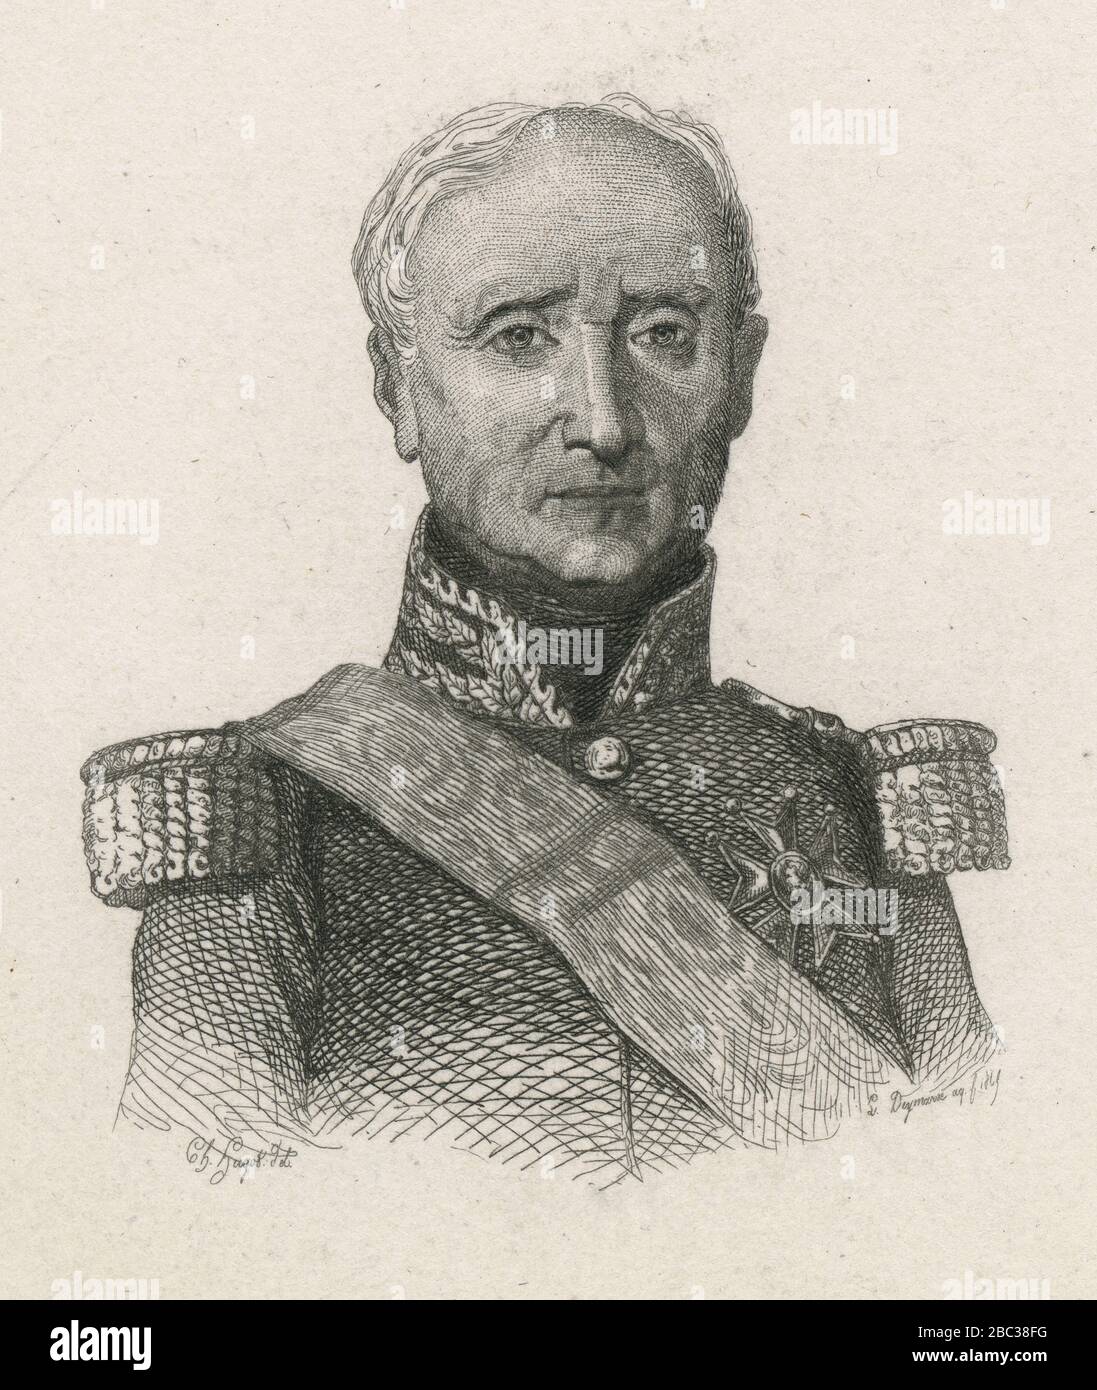 Antique engraving, Thomas Robert Bugeaud. Thomas Robert Bugeaud (1784-1849), Marquis of La Piconnerie, Duke of Isly, is a French soldier, Marshal of France, and Governor General of Algeria. SOURCE: ORIGINAL ENGRAVING Stock Photo